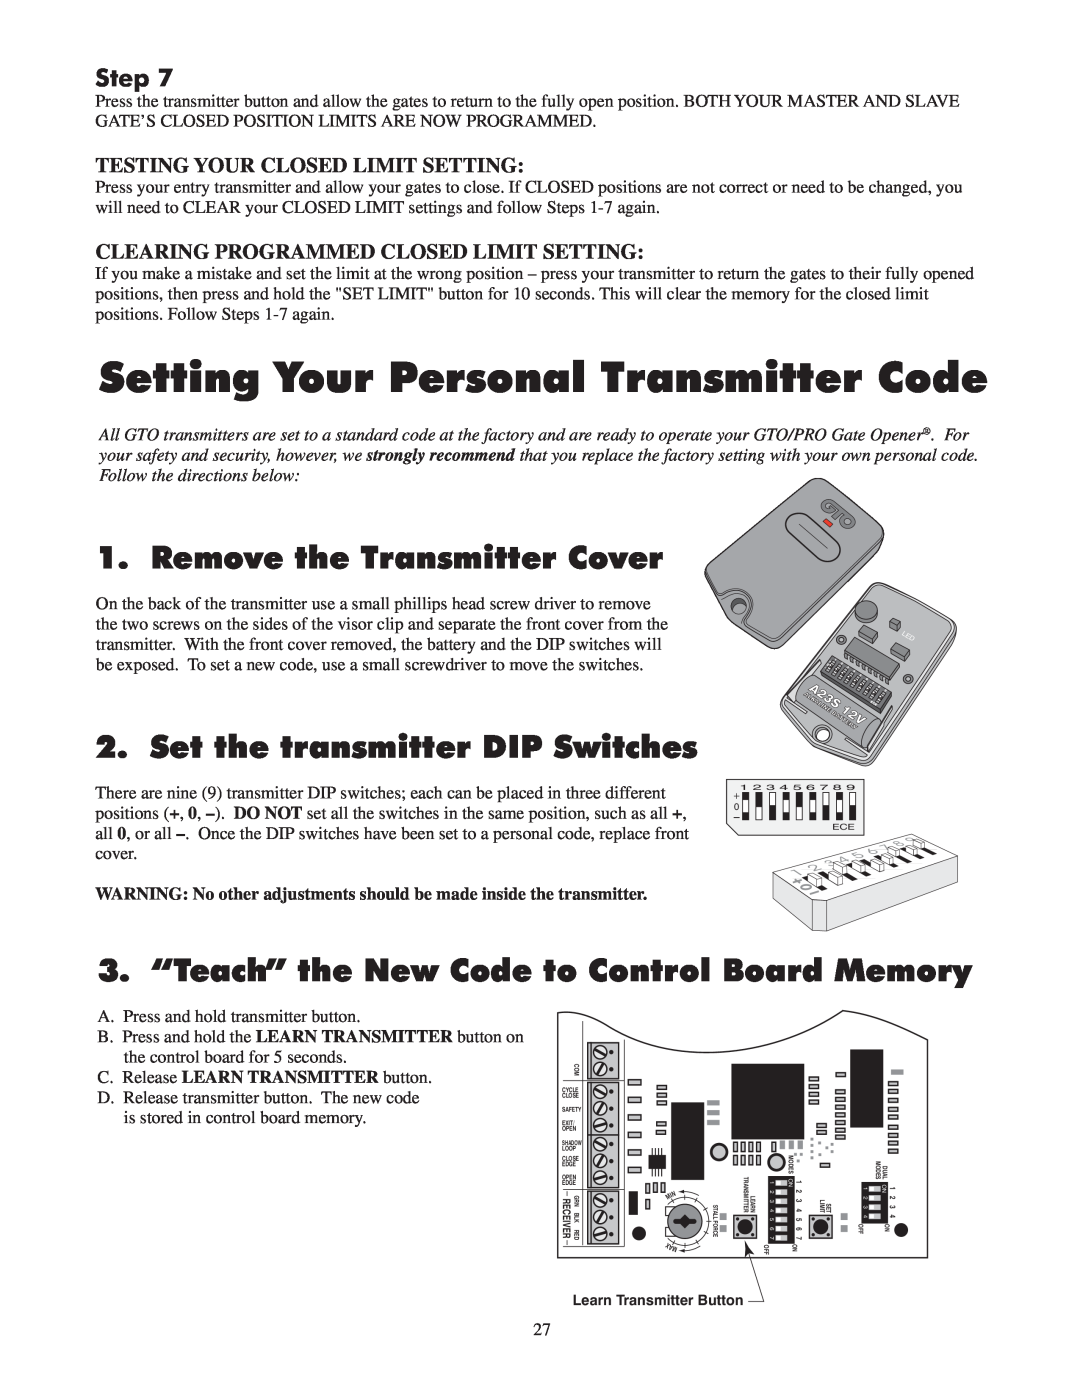 GTO 2502 Setting Your Personal Transmitter Code, Remove the Transmitter Cover, Set the transmitter DIP Switches, Step 